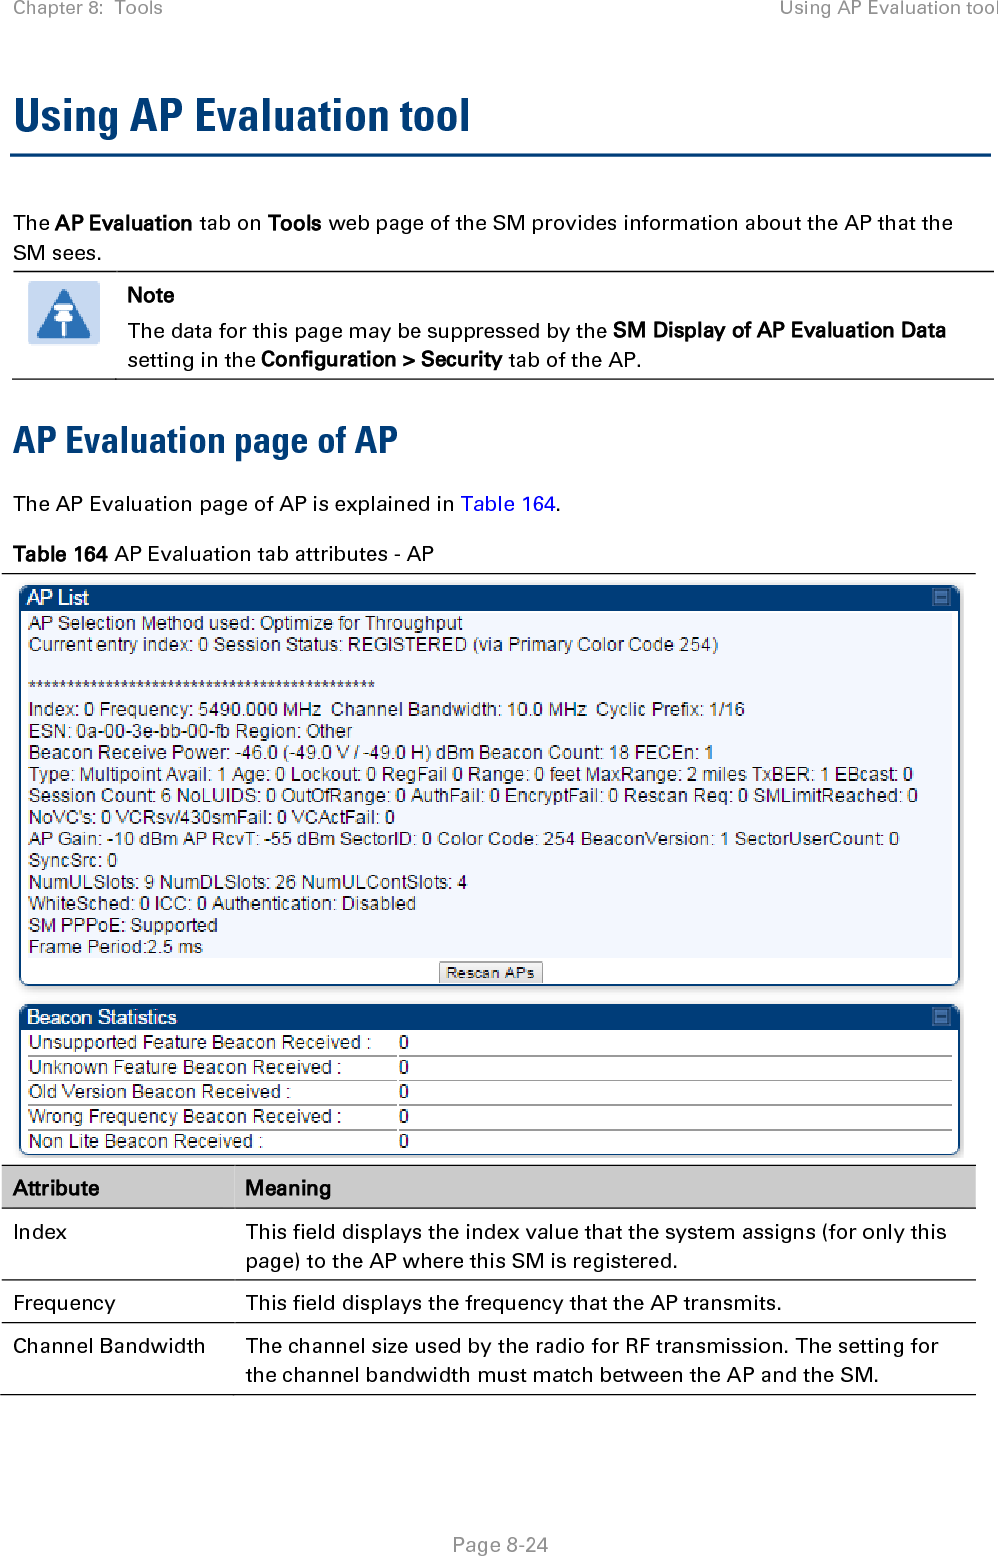 Chapter 8:  Tools Using AP Evaluation tool   Page 8-24 Using AP Evaluation tool The AP Evaluation tab on Tools web page of the SM provides information about the AP that the SM sees.   Note The data for this page may be suppressed by the SM Display of AP Evaluation Data setting in the Configuration &gt; Security tab of the AP. AP Evaluation page of AP The AP Evaluation page of AP is explained in Table 164. Table 164 AP Evaluation tab attributes - AP  Attribute Meaning Index This field displays the index value that the system assigns (for only this page) to the AP where this SM is registered. Frequency This field displays the frequency that the AP transmits. Channel Bandwidth The channel size used by the radio for RF transmission. The setting for the channel bandwidth must match between the AP and the SM.  